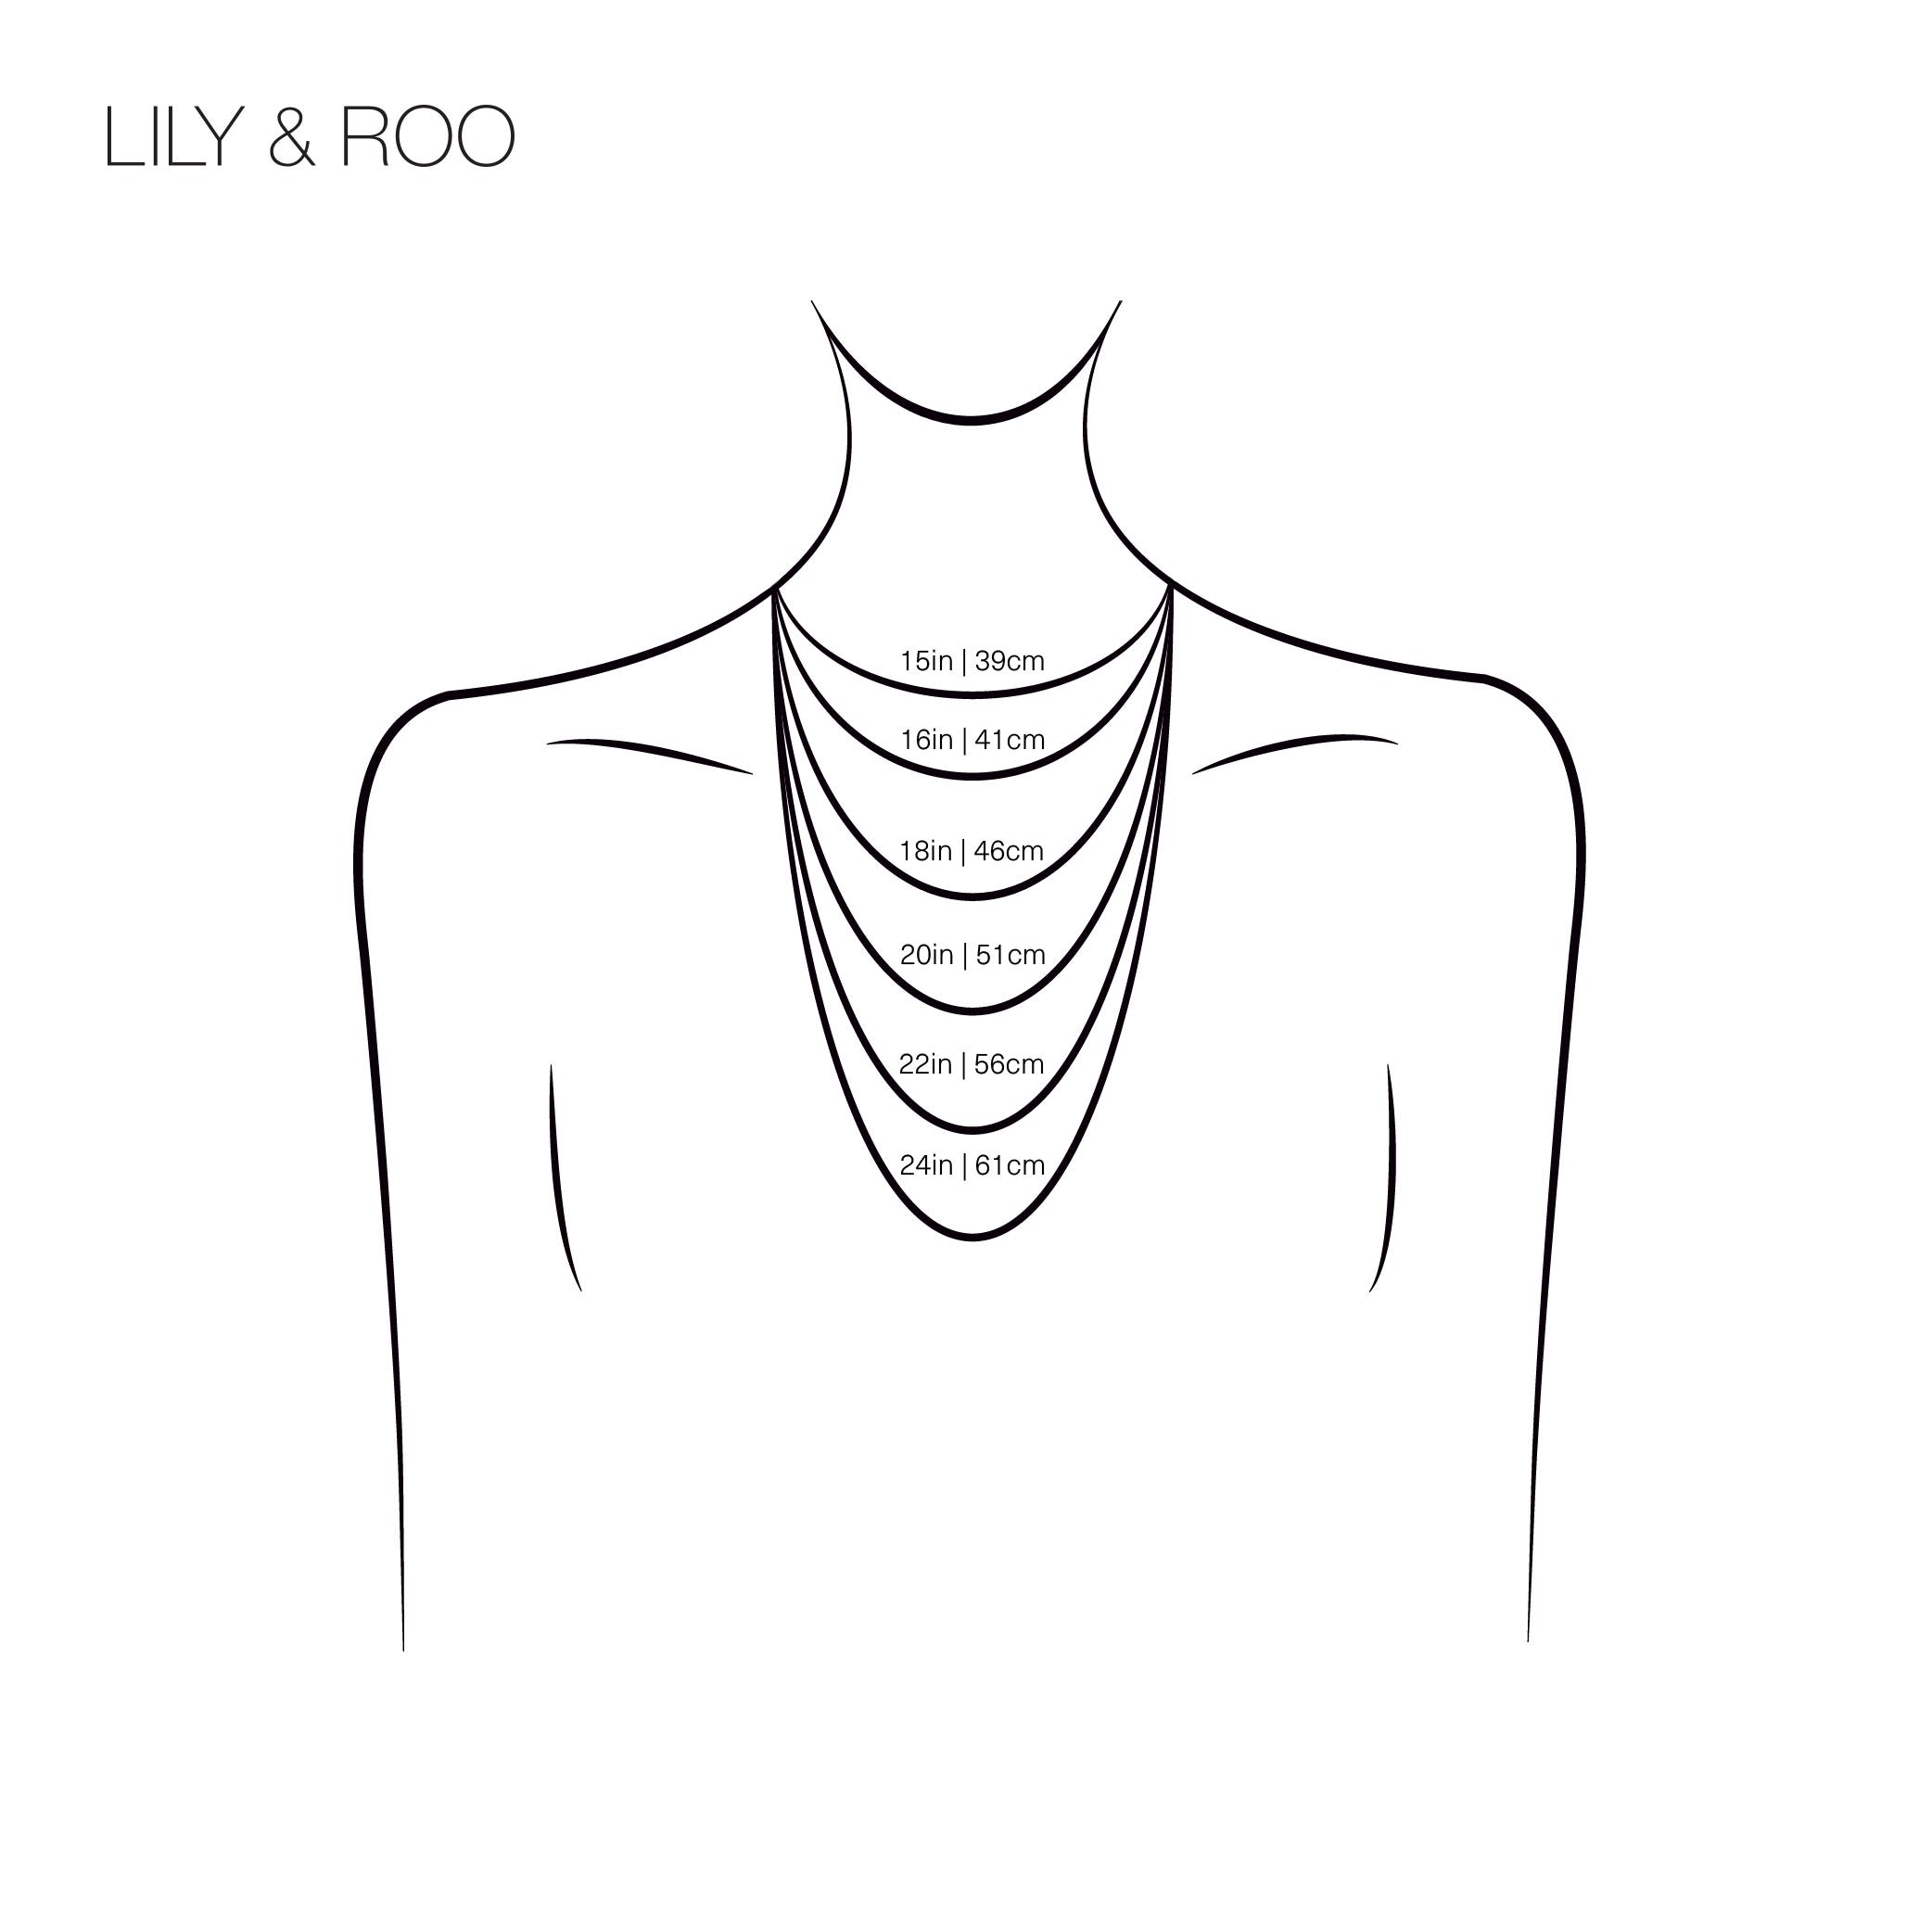 Drawing of a woman with different necklaces and their sizes to show how the different lengths sit on the chest